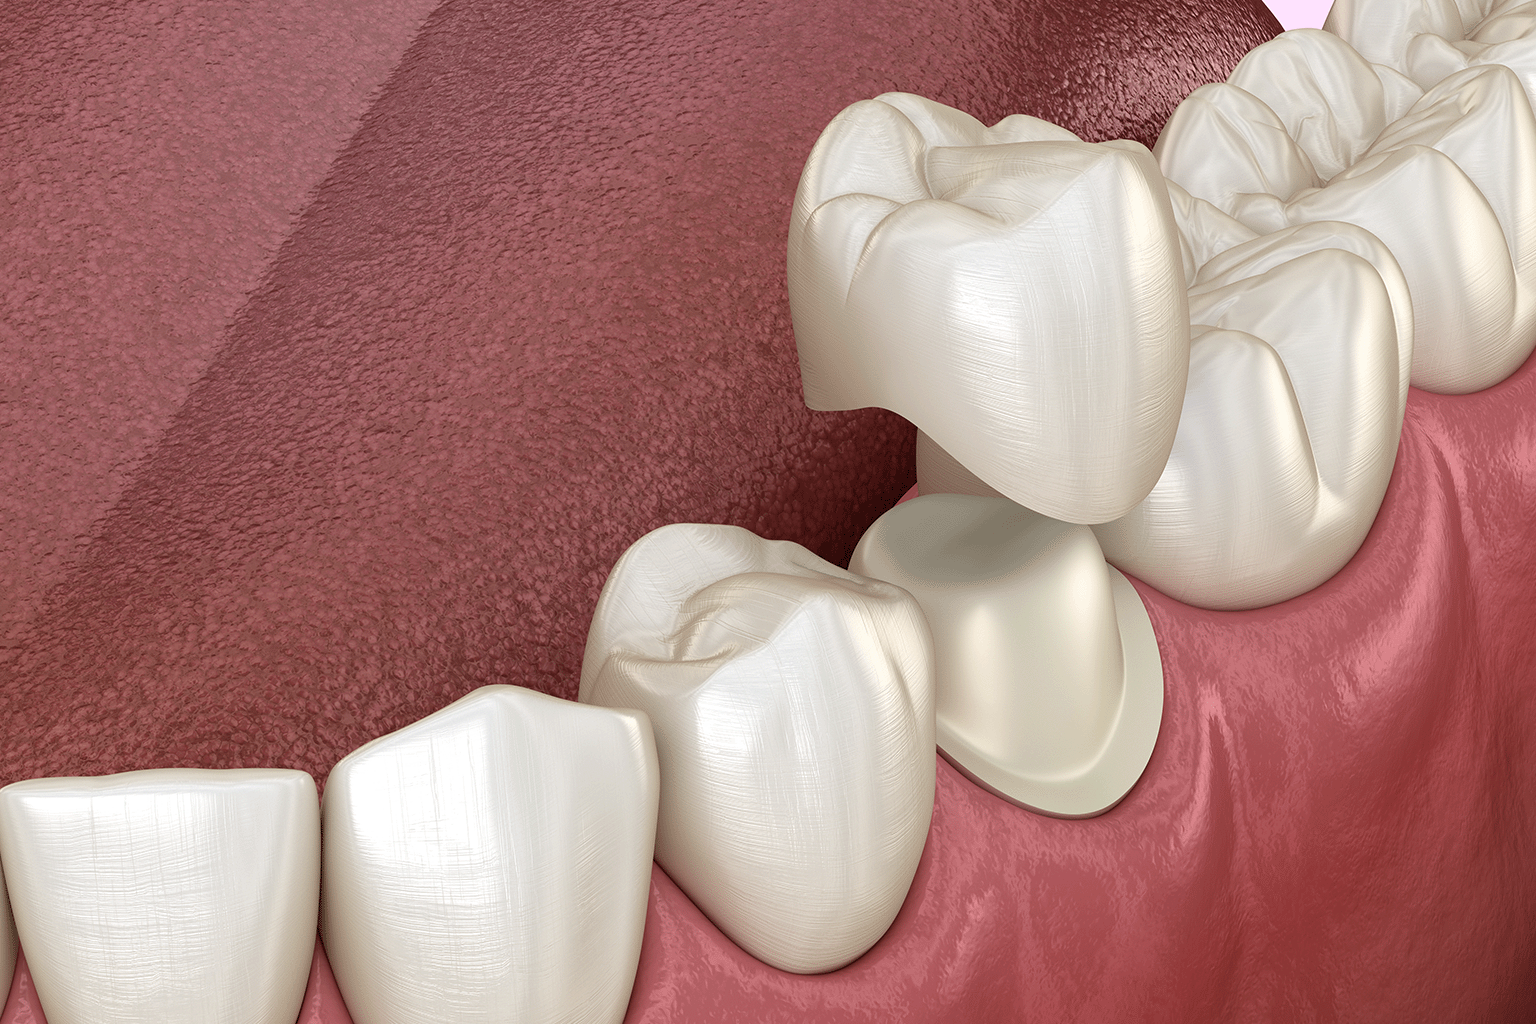 rendering of cown being placed on tooth